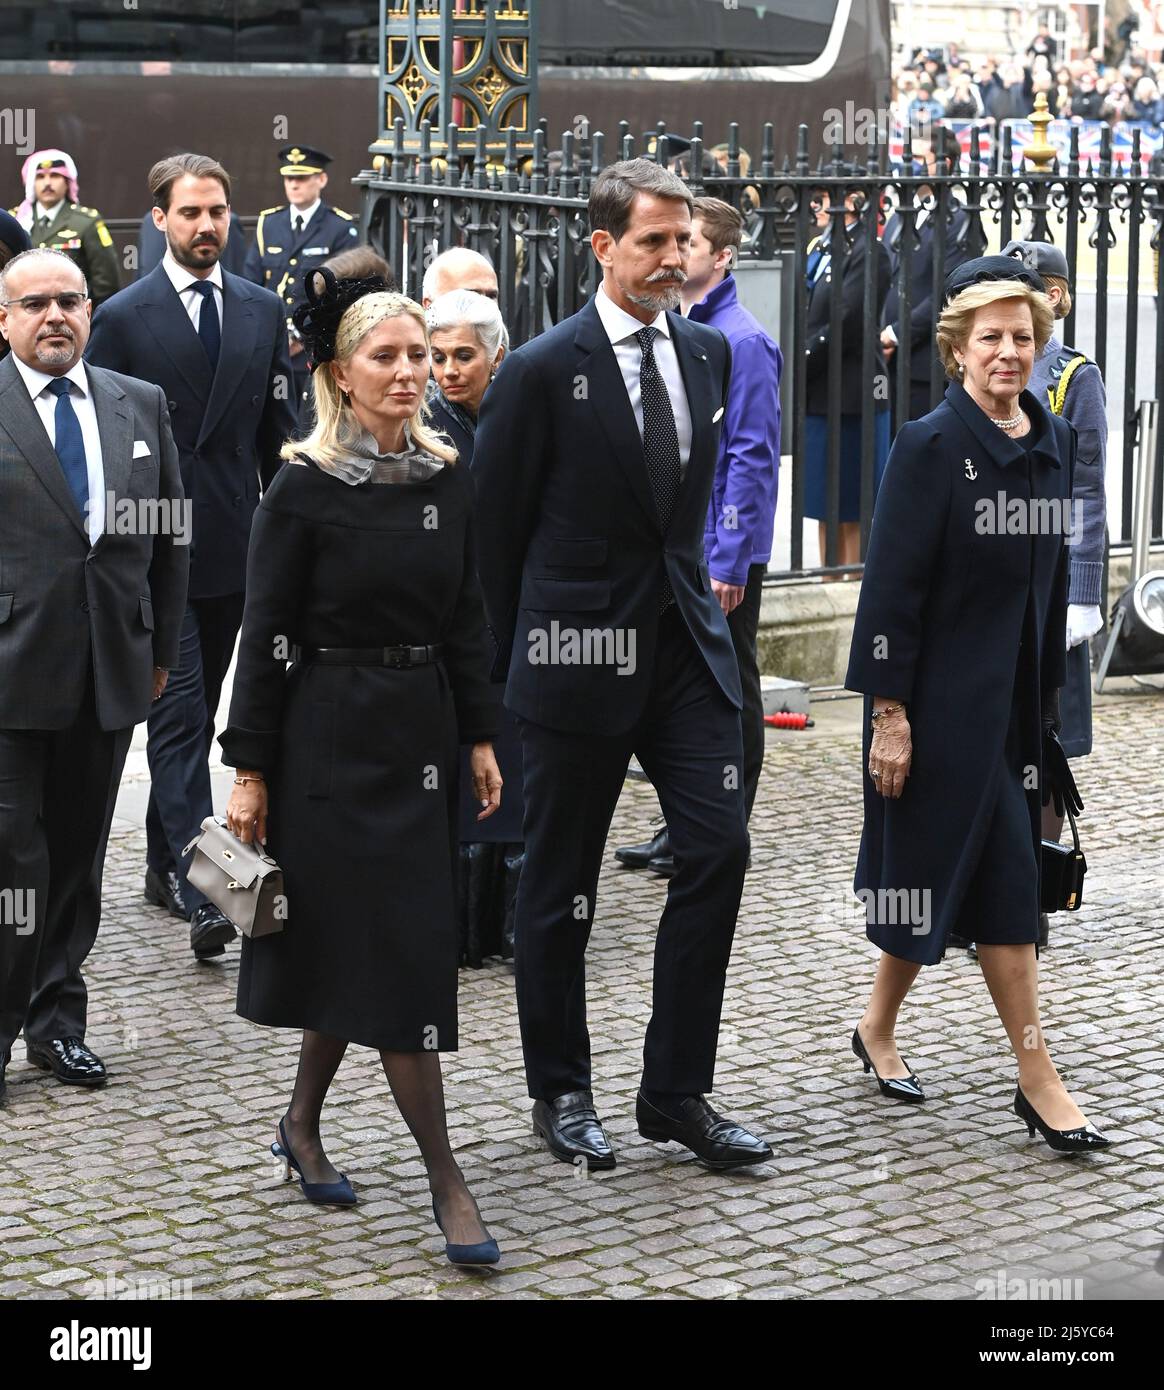 Photo Must Be Credited ©Alpha Press 079965 29/03/2022 Prince Salman bin Hamad Al Khalifa with Greece's former Queen Anne-Marie, Greece's Crown Prince Pavlos and Greece's Crown Princess Marie-Chantal at Service of Thanksgiving for HRH The Prince Philip Duke of Edinburgh held at Westminster Abbey in London. Stock Photo